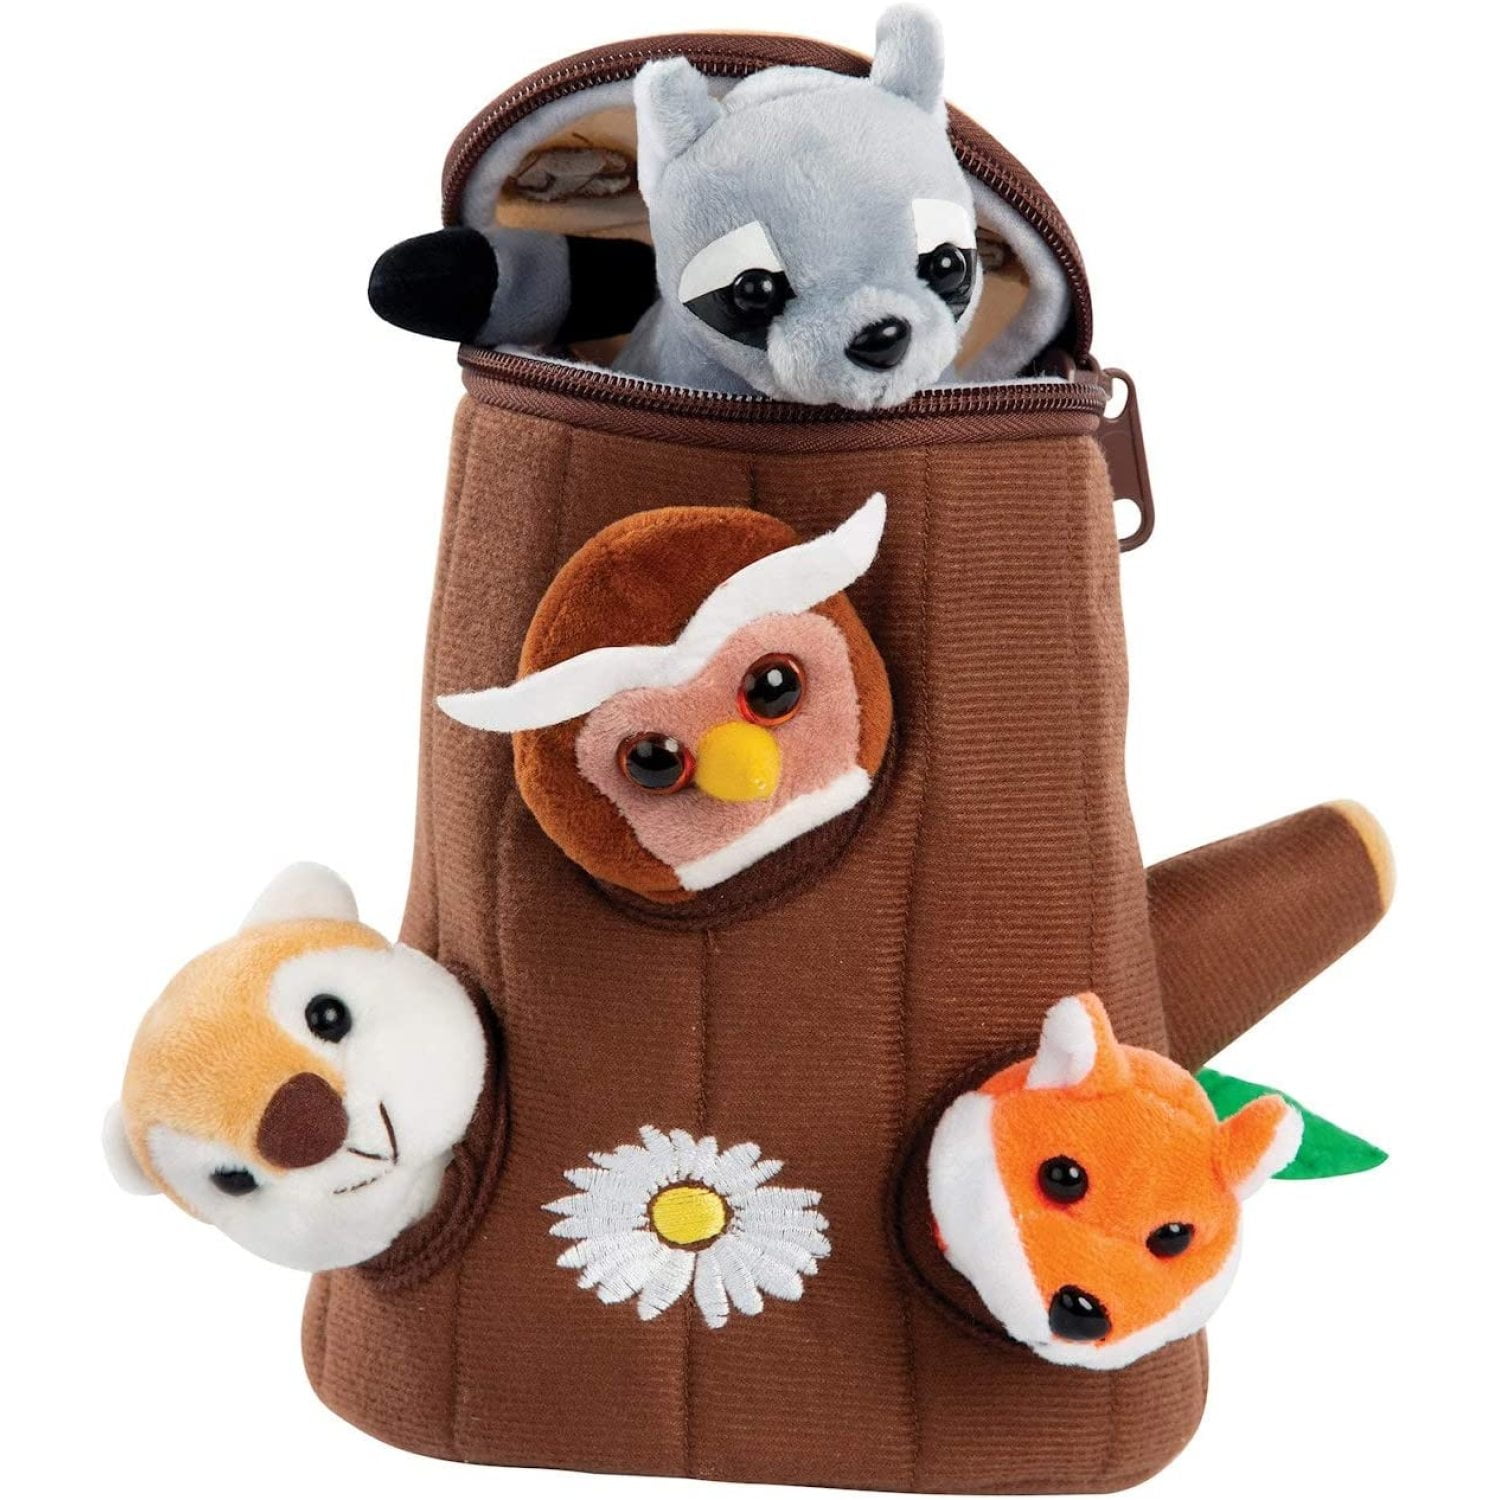 Forest Friends Plush Talking Stuffed Animals Set, Plush Toy Set for Kids  Babies Toddlers, Piece Set Baby Stuffed Animals Includes Tree Carrier, Owl,  Squirrel, Raccoo... 